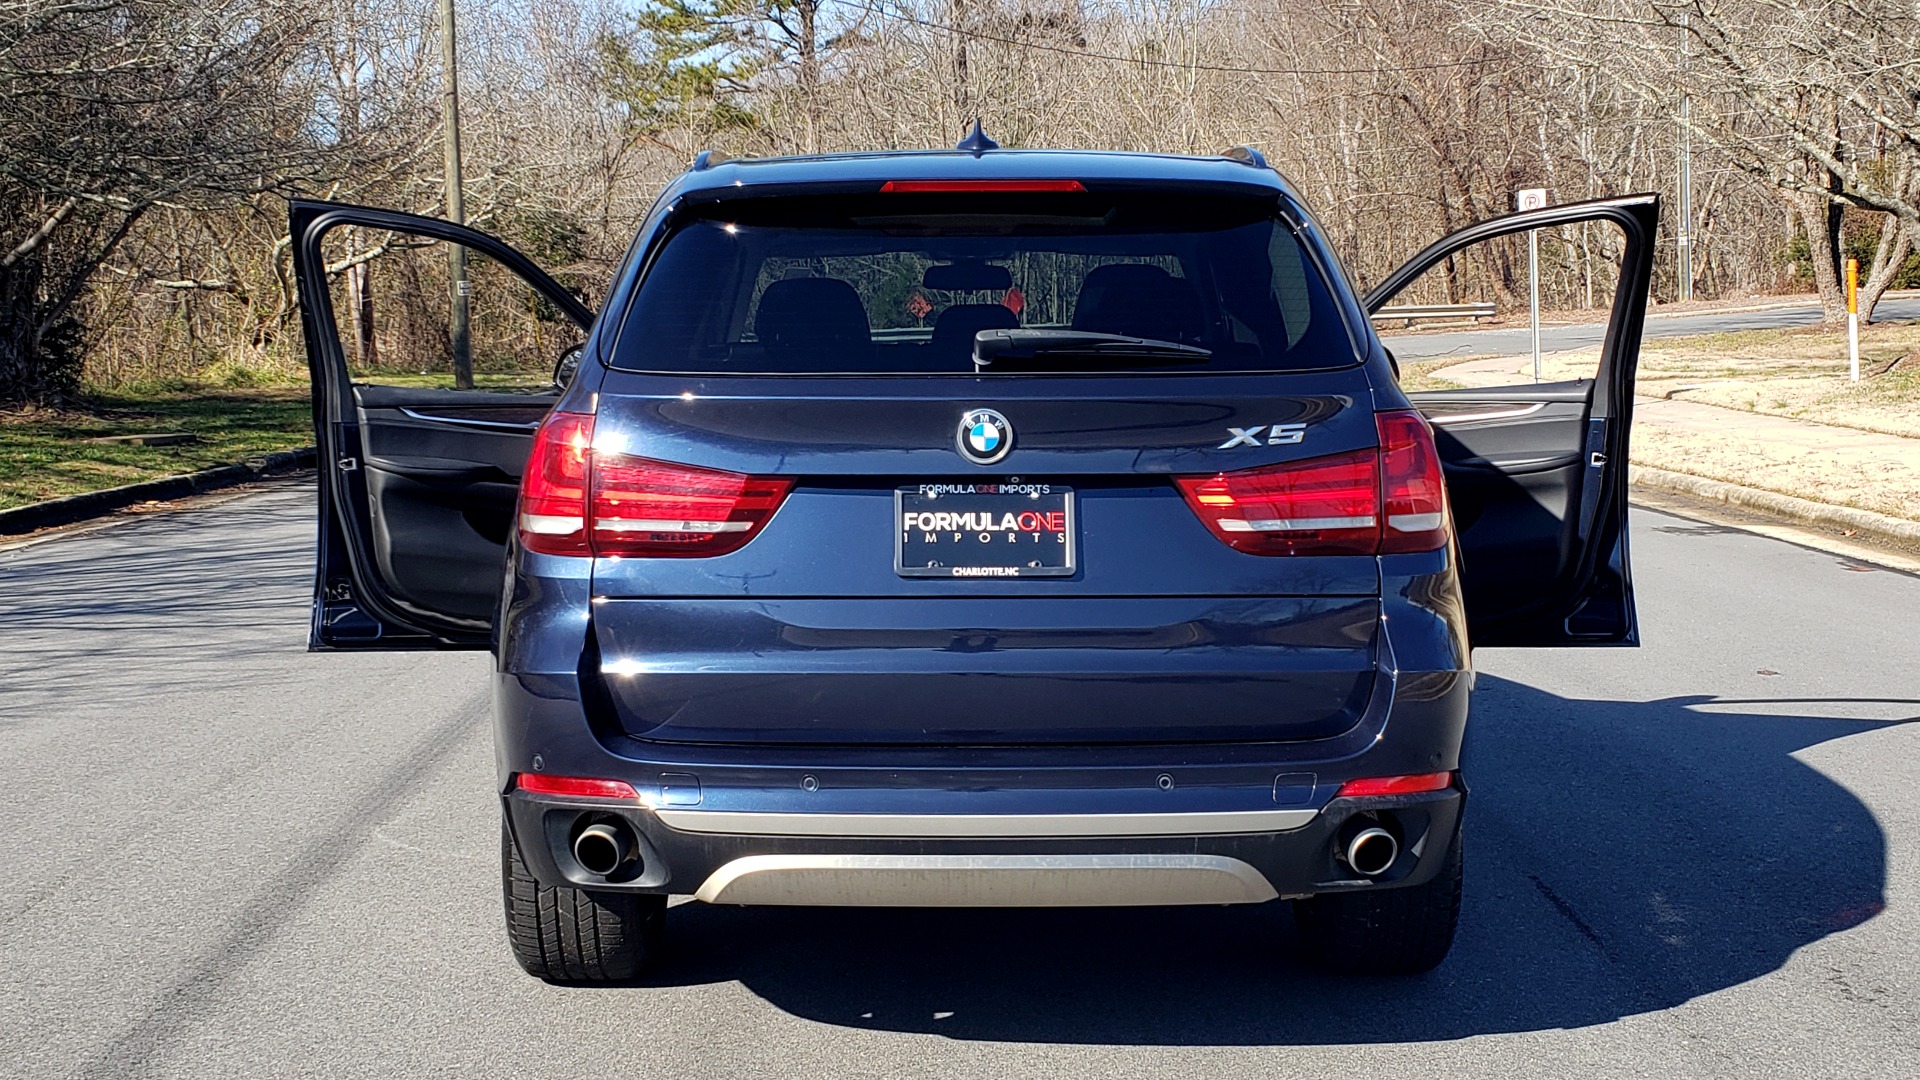 Used 2015 BMW X5 XDRIVE35I PREMIUM / NAV / XLINE / CLD WTHR / DRVR ASST / REARVIEW for sale Sold at Formula Imports in Charlotte NC 28227 32